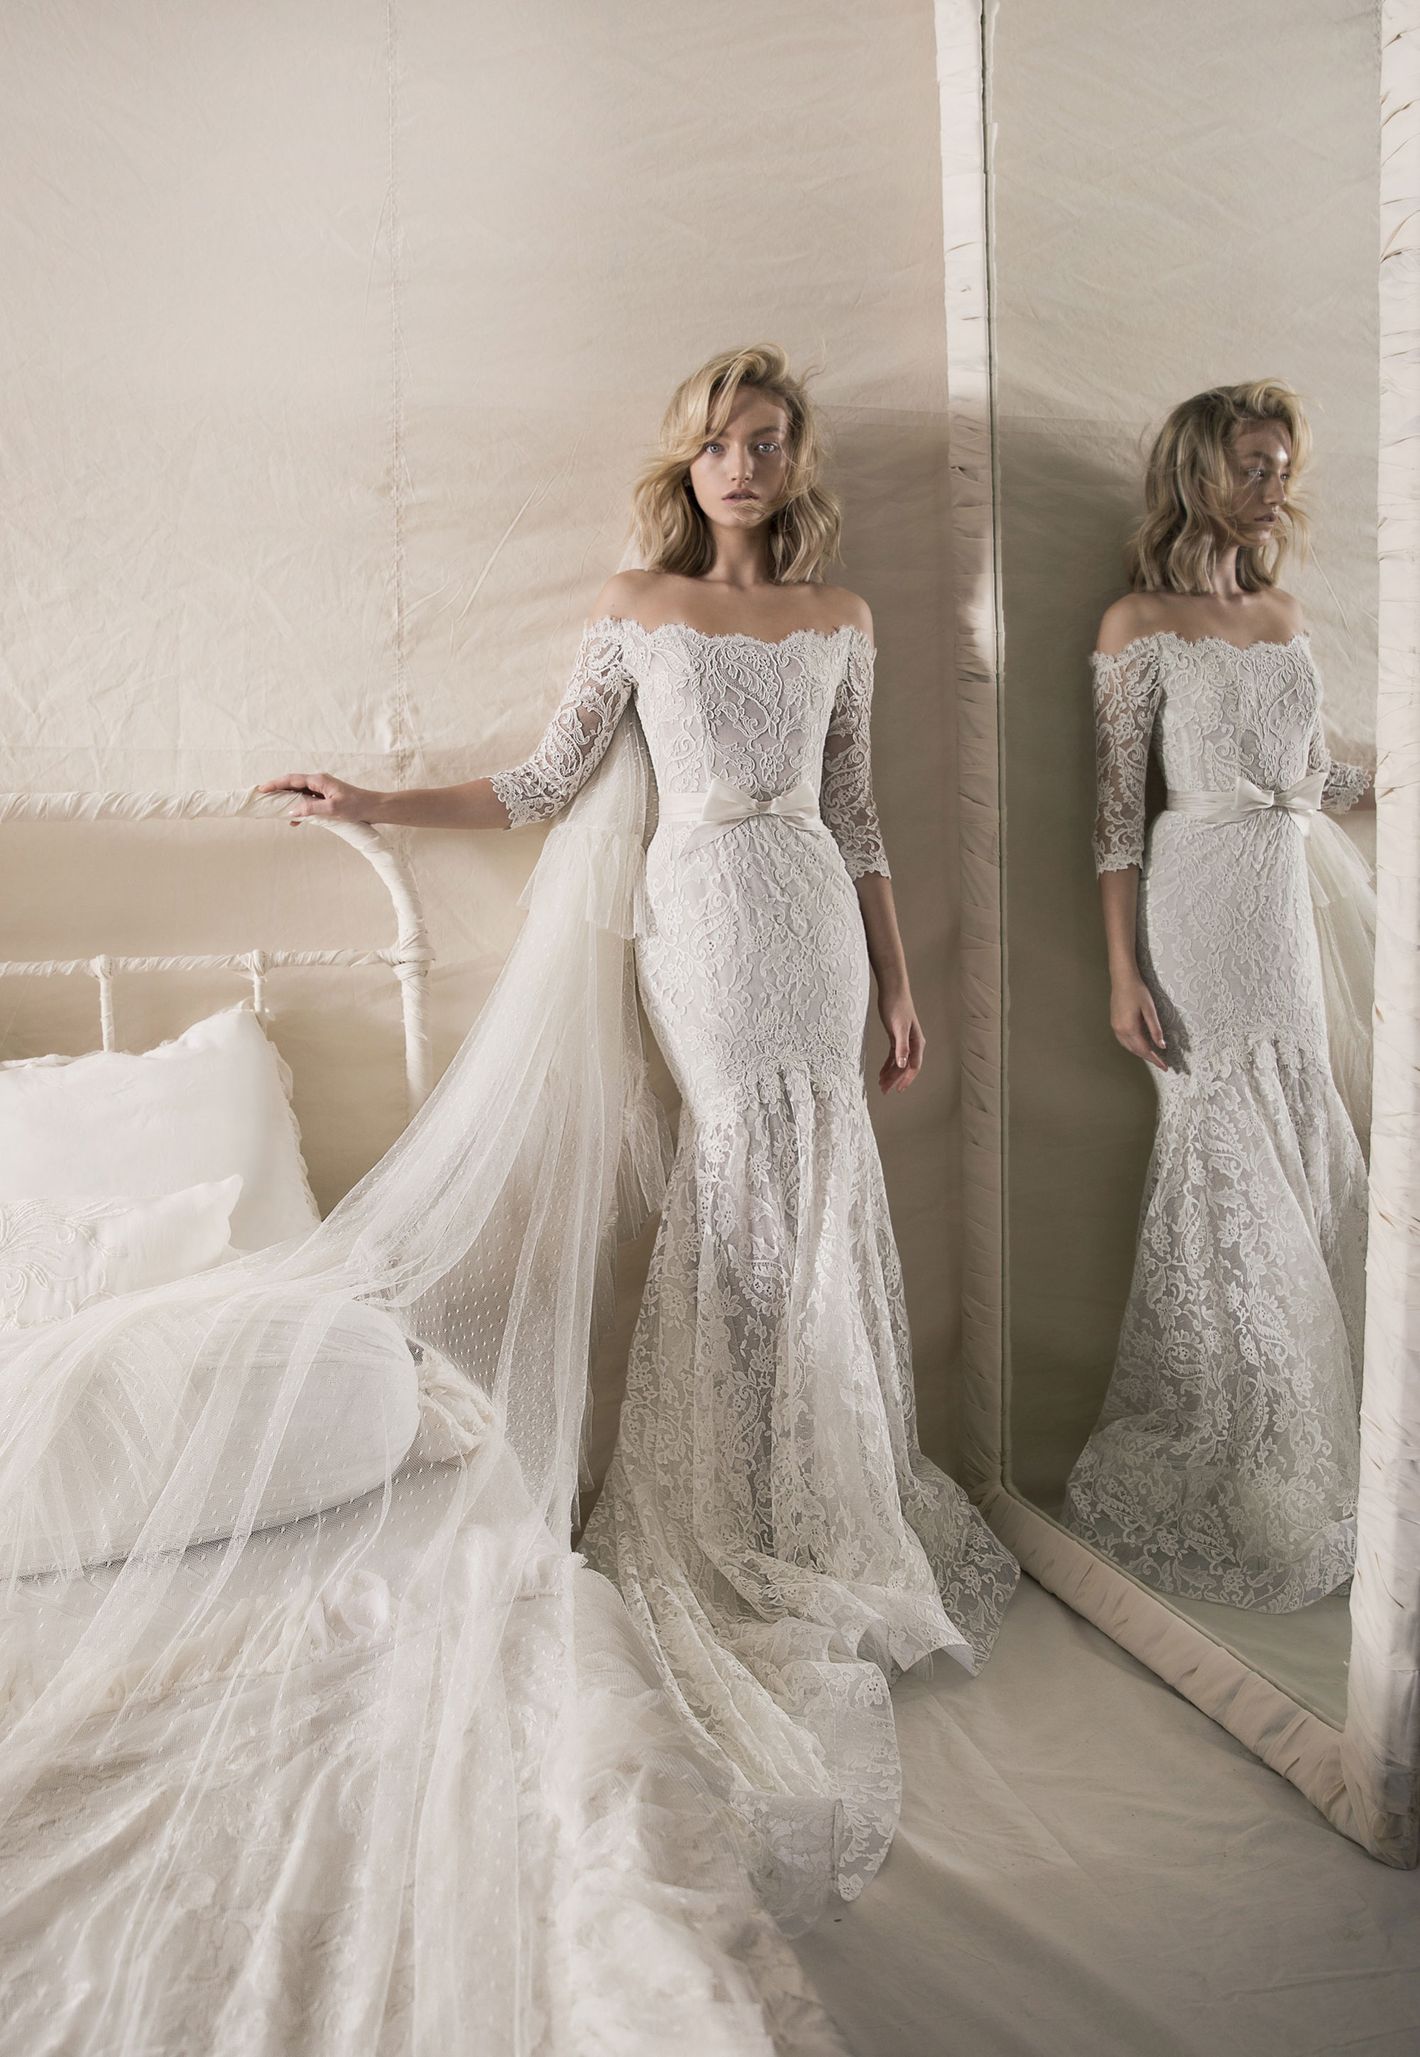 How to choose a wedding dress for the winter - Quora